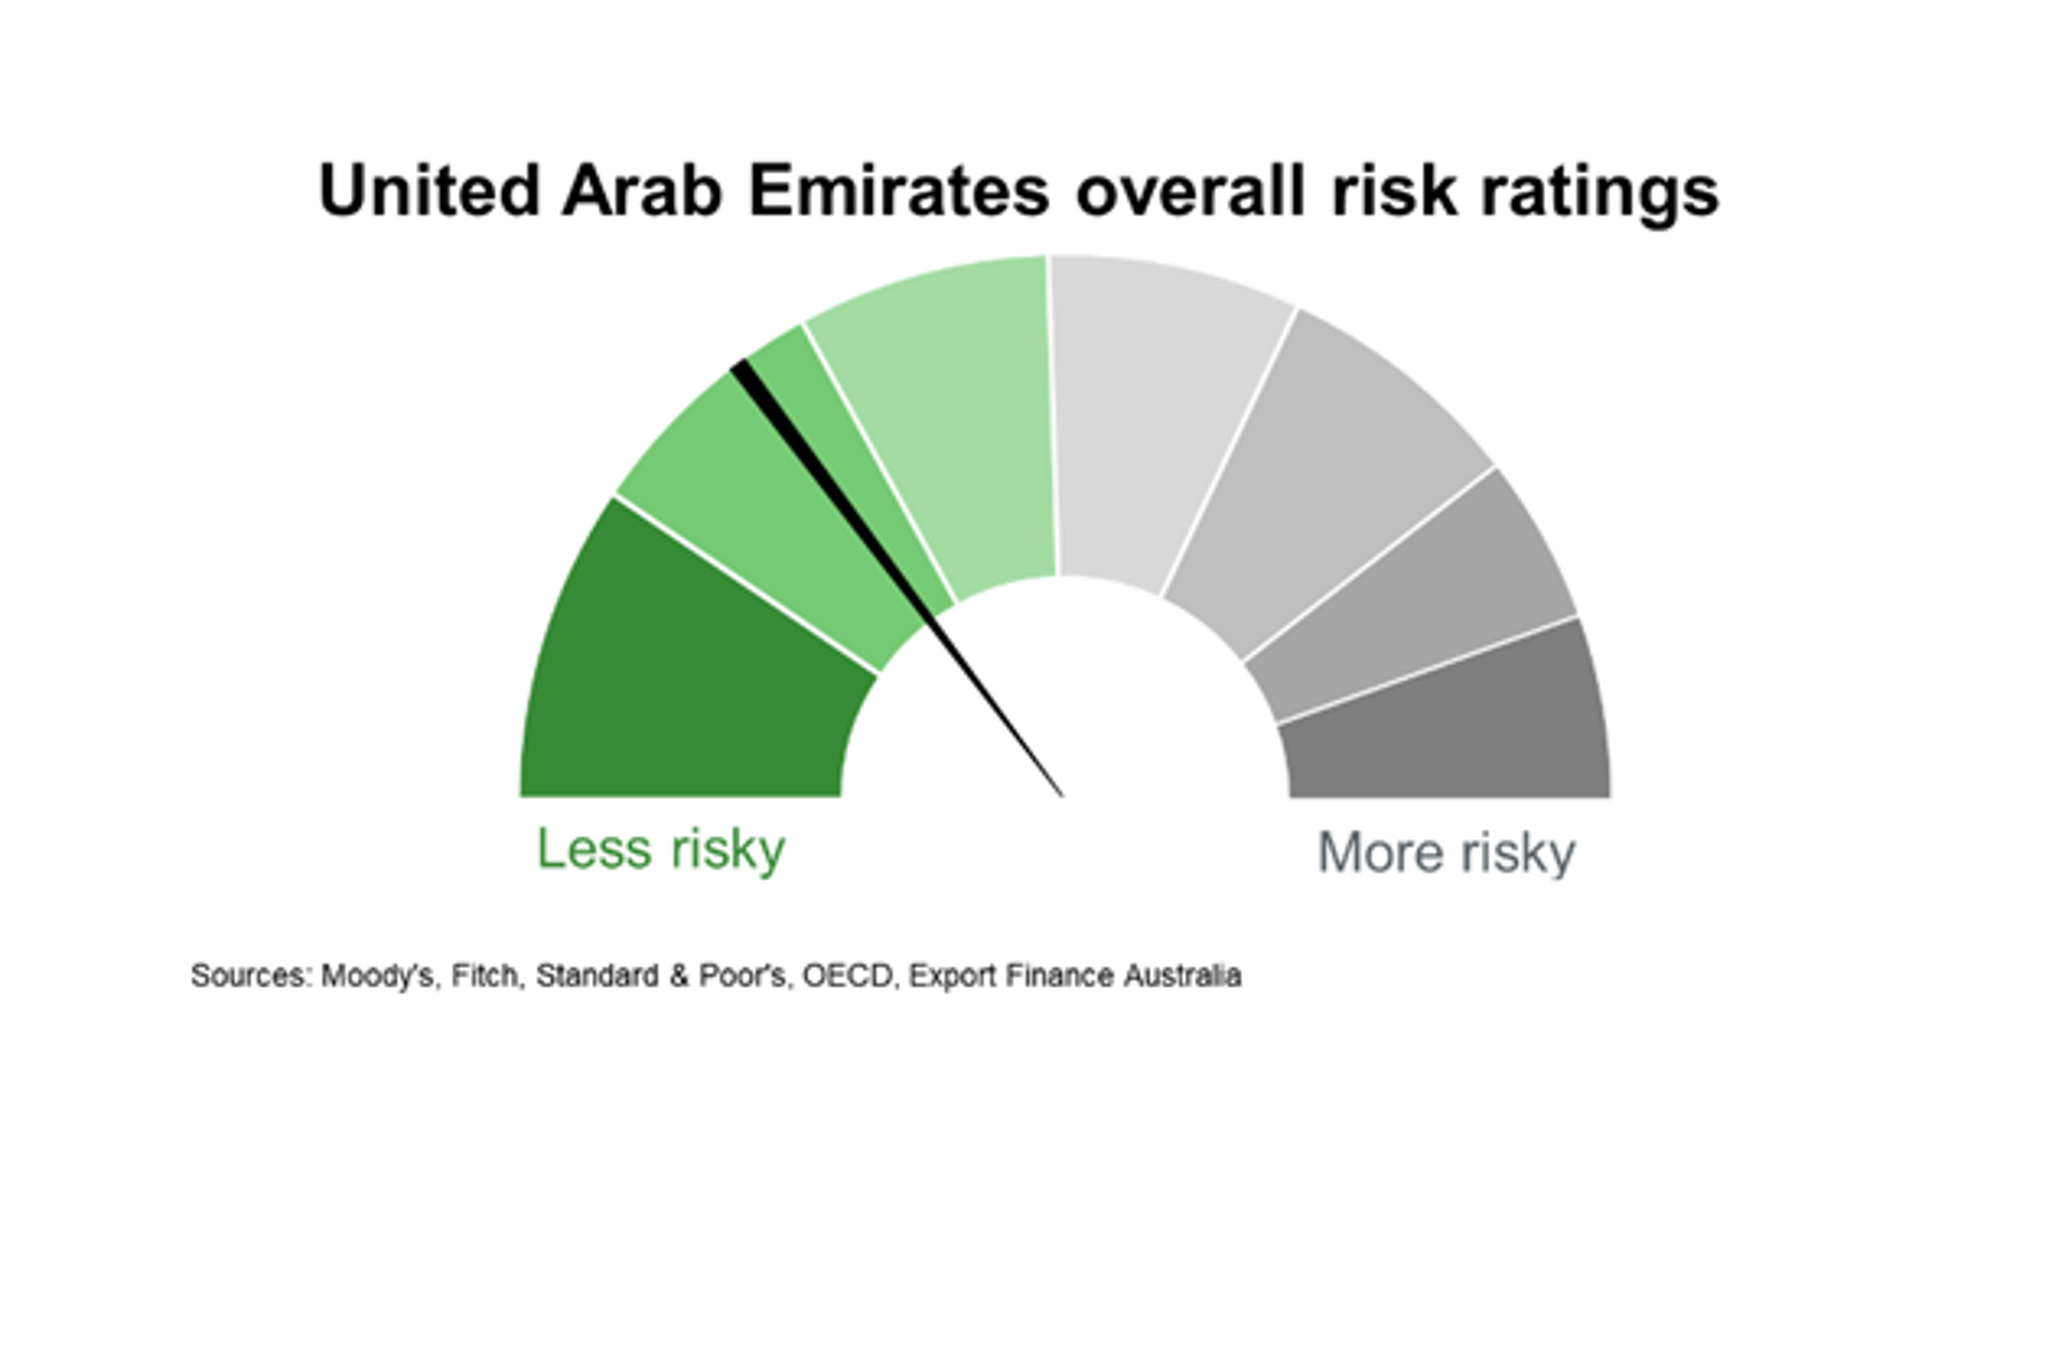 Overall Risk Ratings